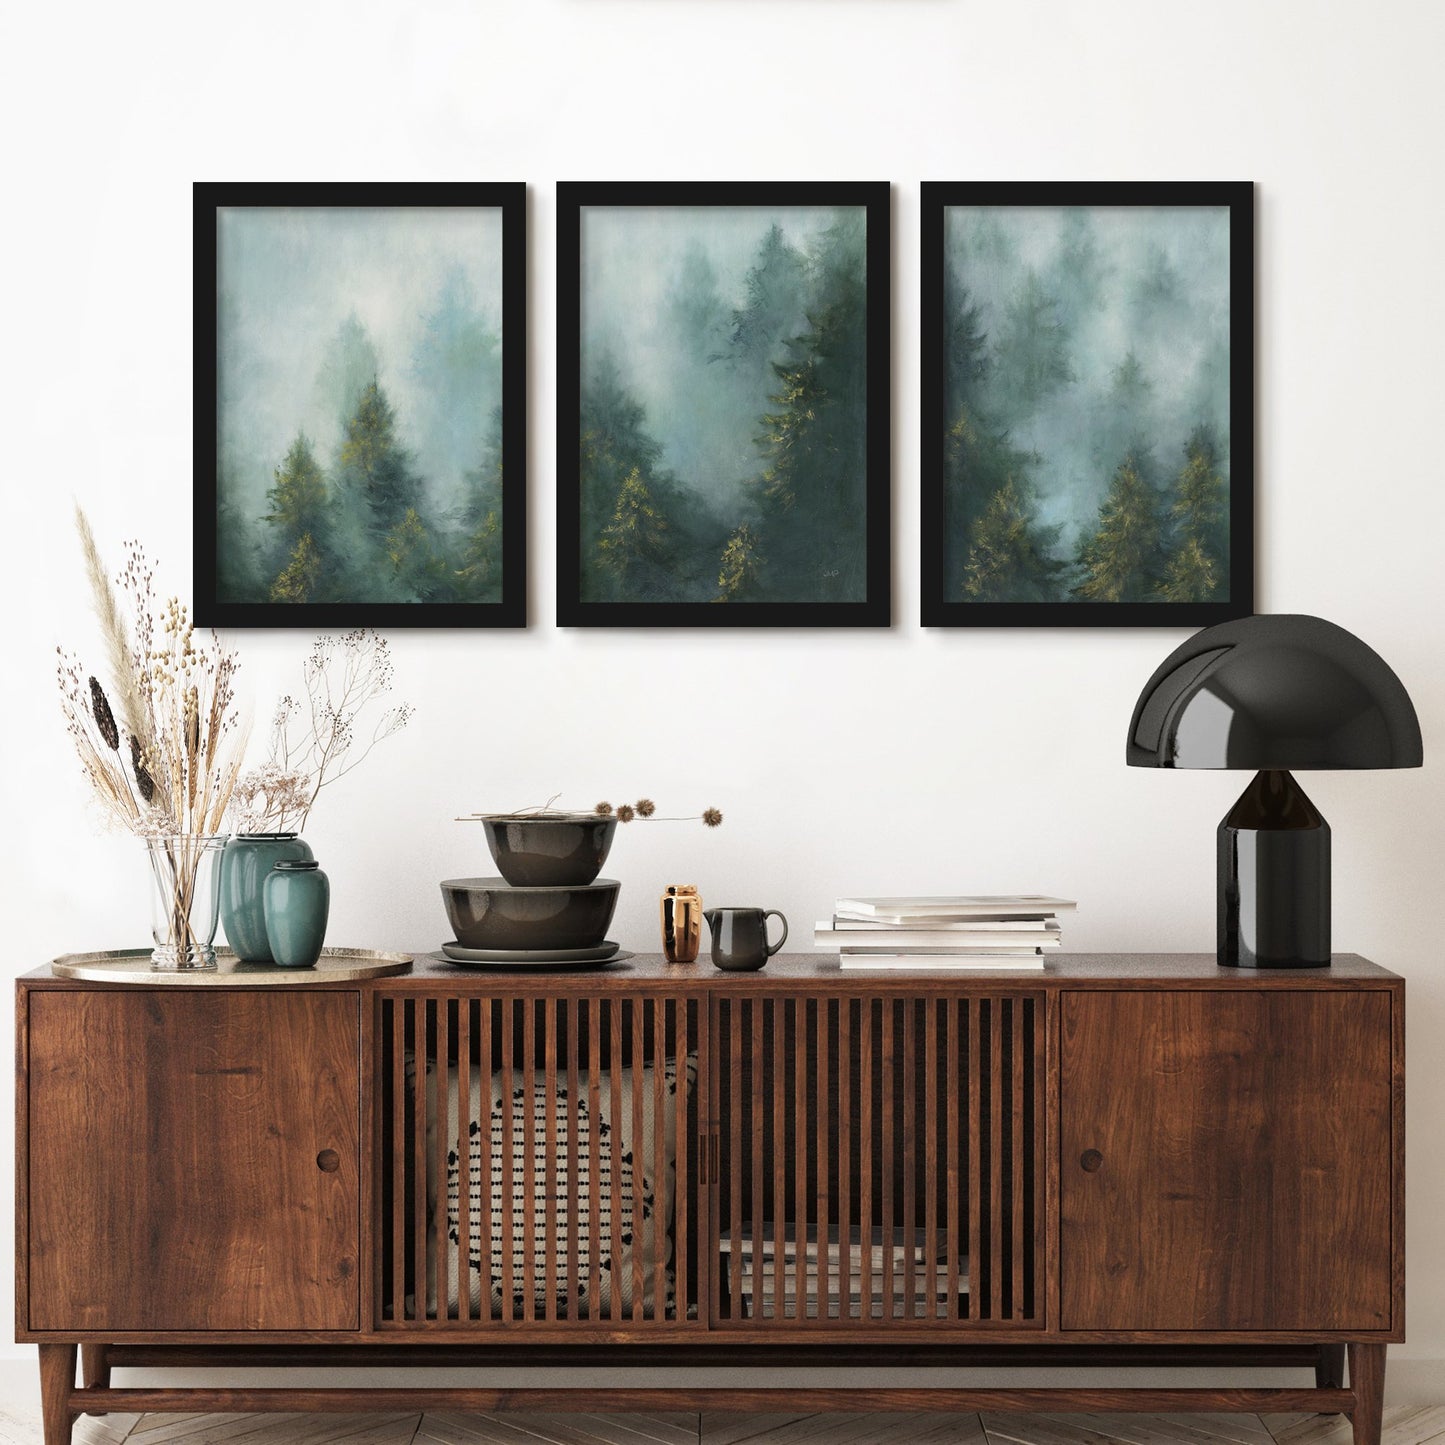 Misty Forest  by Julia Purinton - 3 Piece Gallery Framed Print Art Set - Americanflat